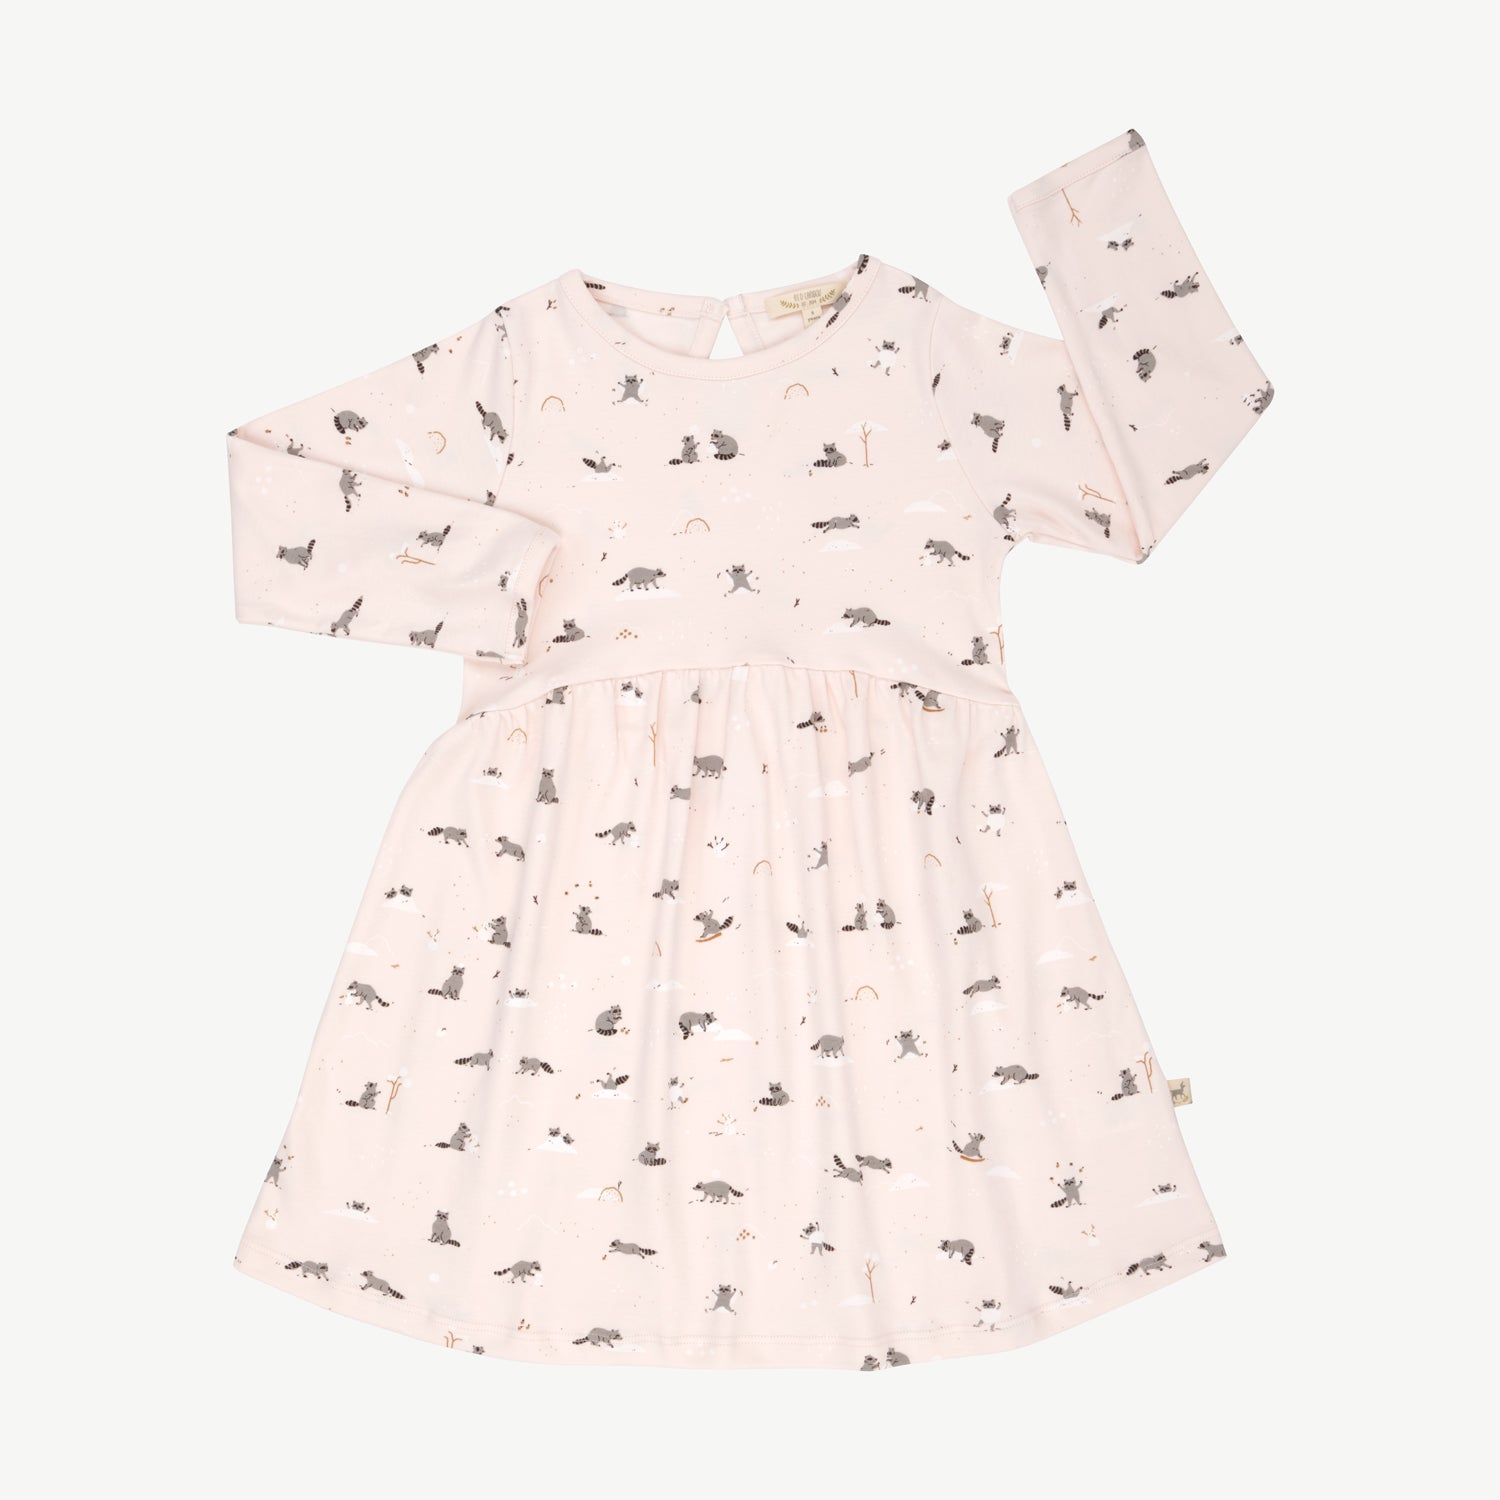 'frolicsome raccoons' pearl dress